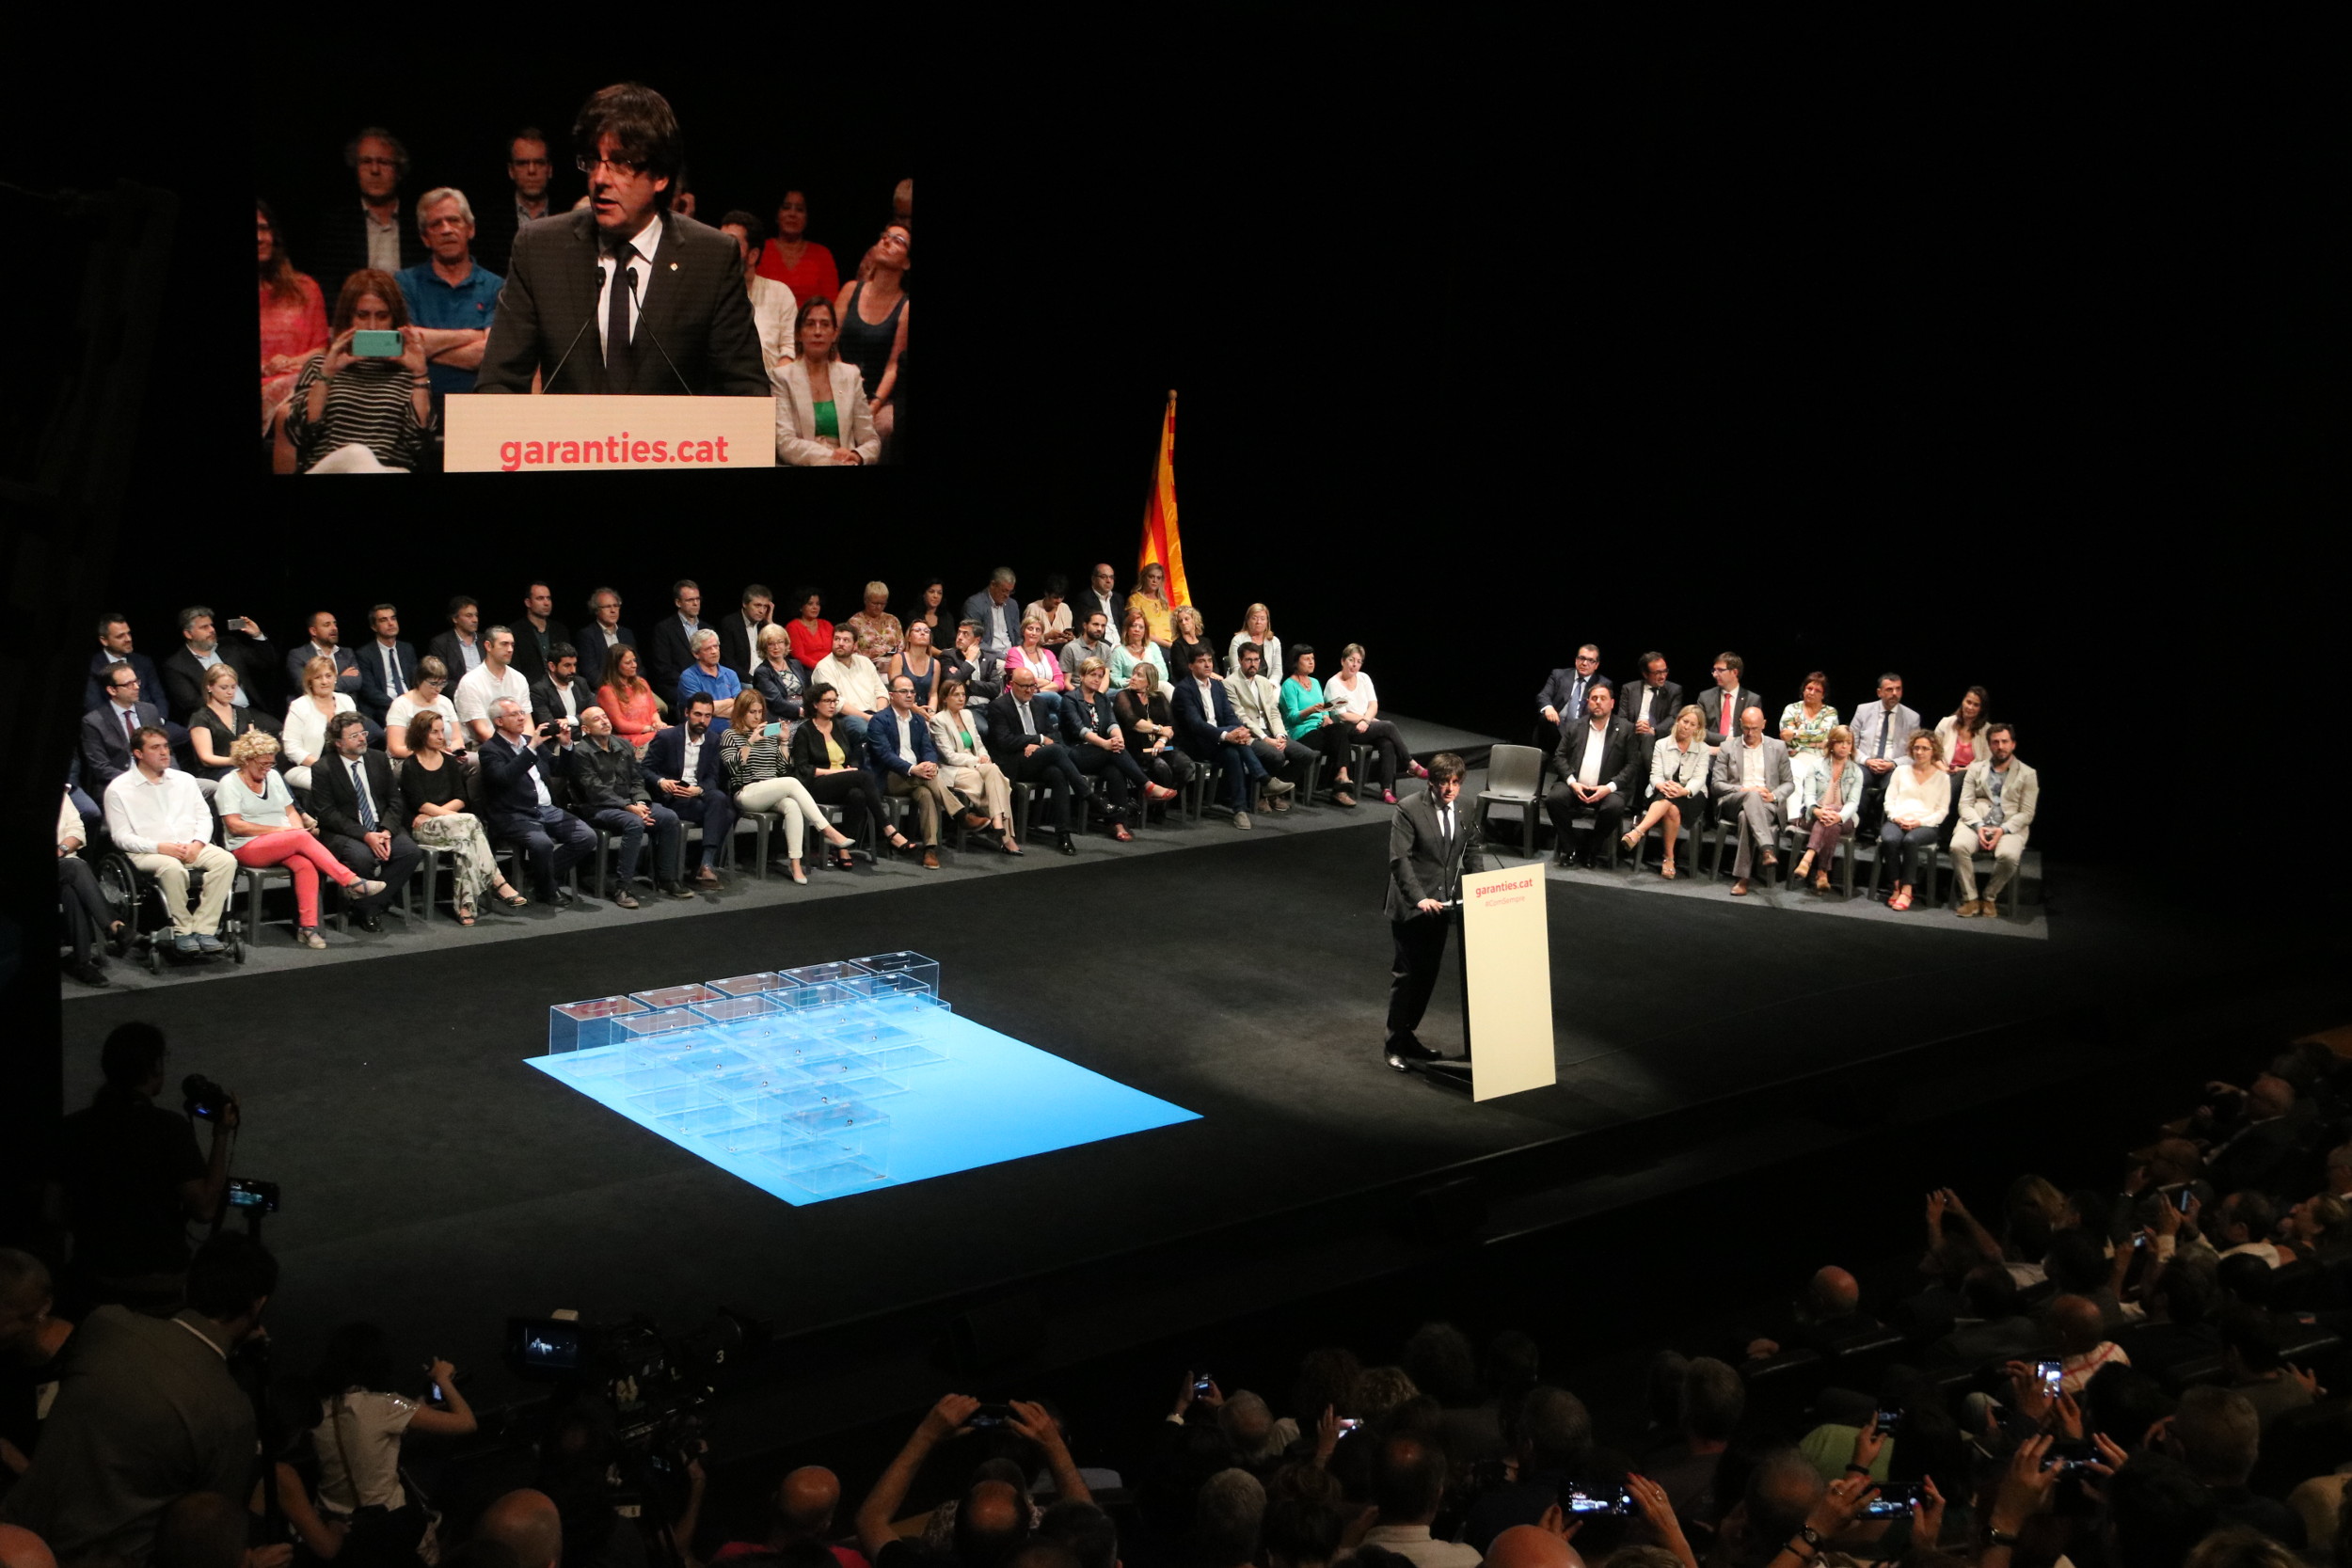 Catalan government took the stage at the Catalan National Theatre